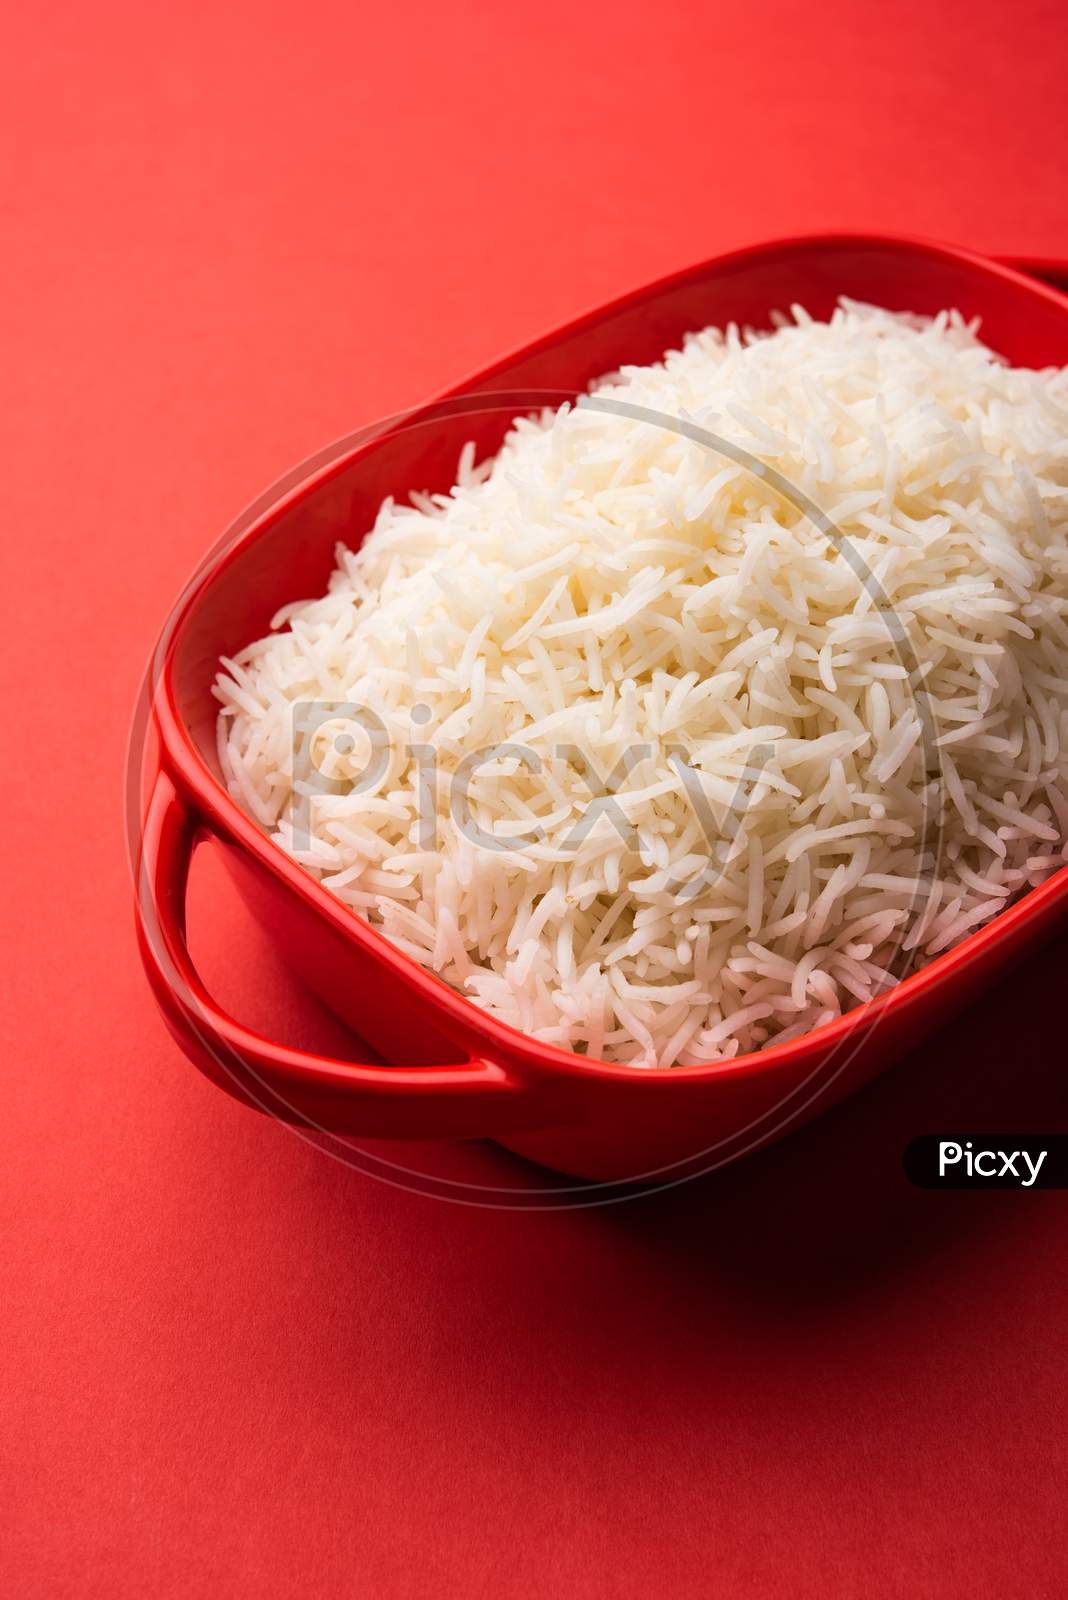 Aromatic Long Basmati Cooked Plain Rice Is An Indian Main Course Food, Served In A Bowl. Selective Focus